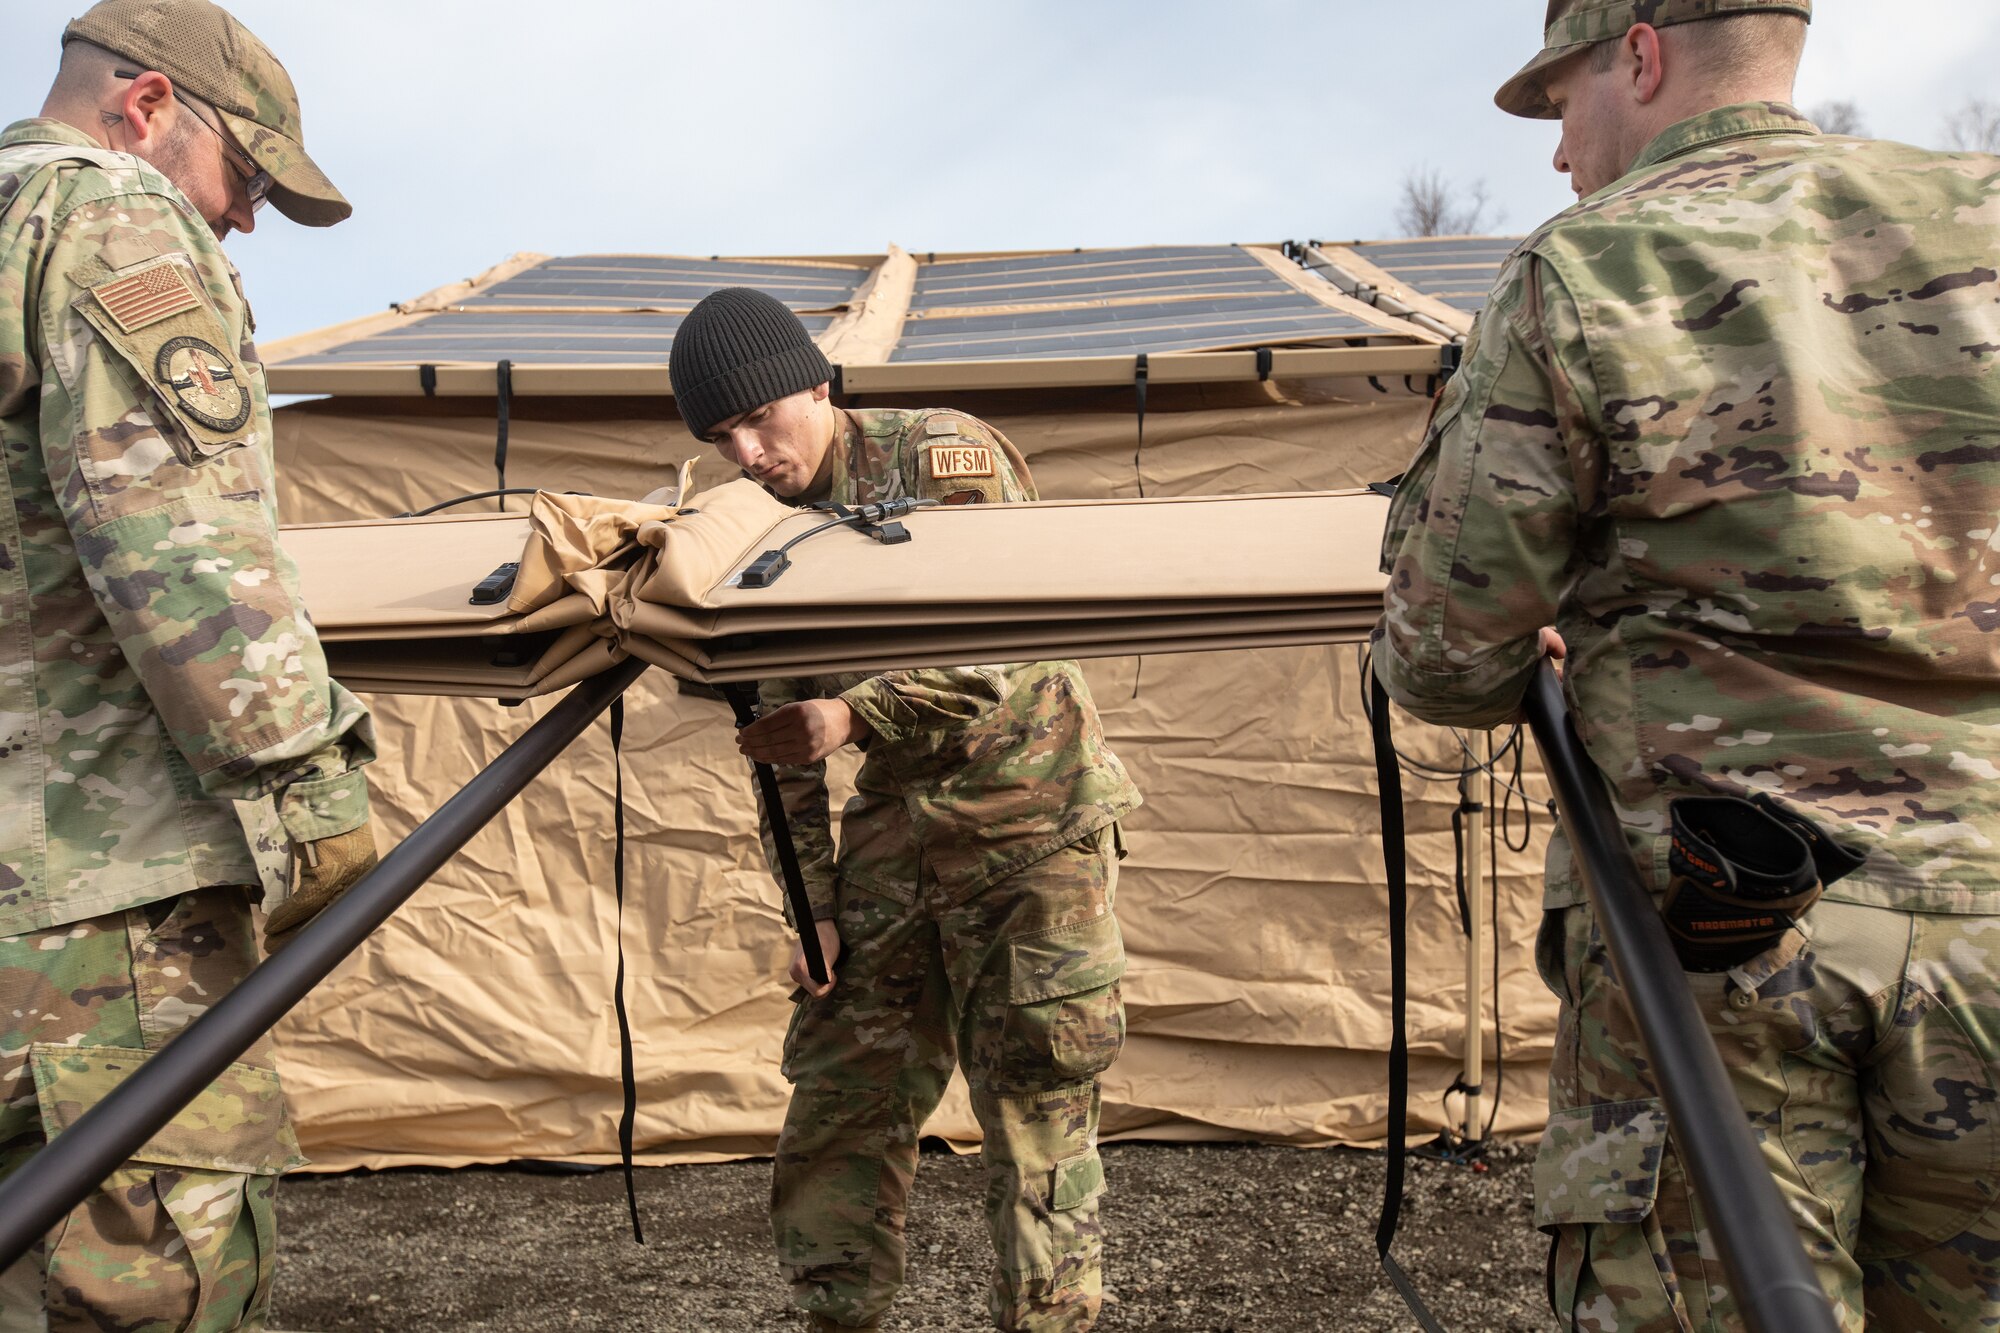 U.S. Air Force  Tech. Sgt. Austin Myers, left, Airman 1st Class Christopher Wolverton, center, and Airman 1st Class Matthew Jaeger, right, water and fuel systems maintenance personnel assigned to 773rd Civil Engineer Squadron, set up a solar panel system for an Agile Combat Employment tent air transportable clinic, during Northern Edge 23-1 at Joint Base Elmendorf-Richardson, Alaska, May 9,